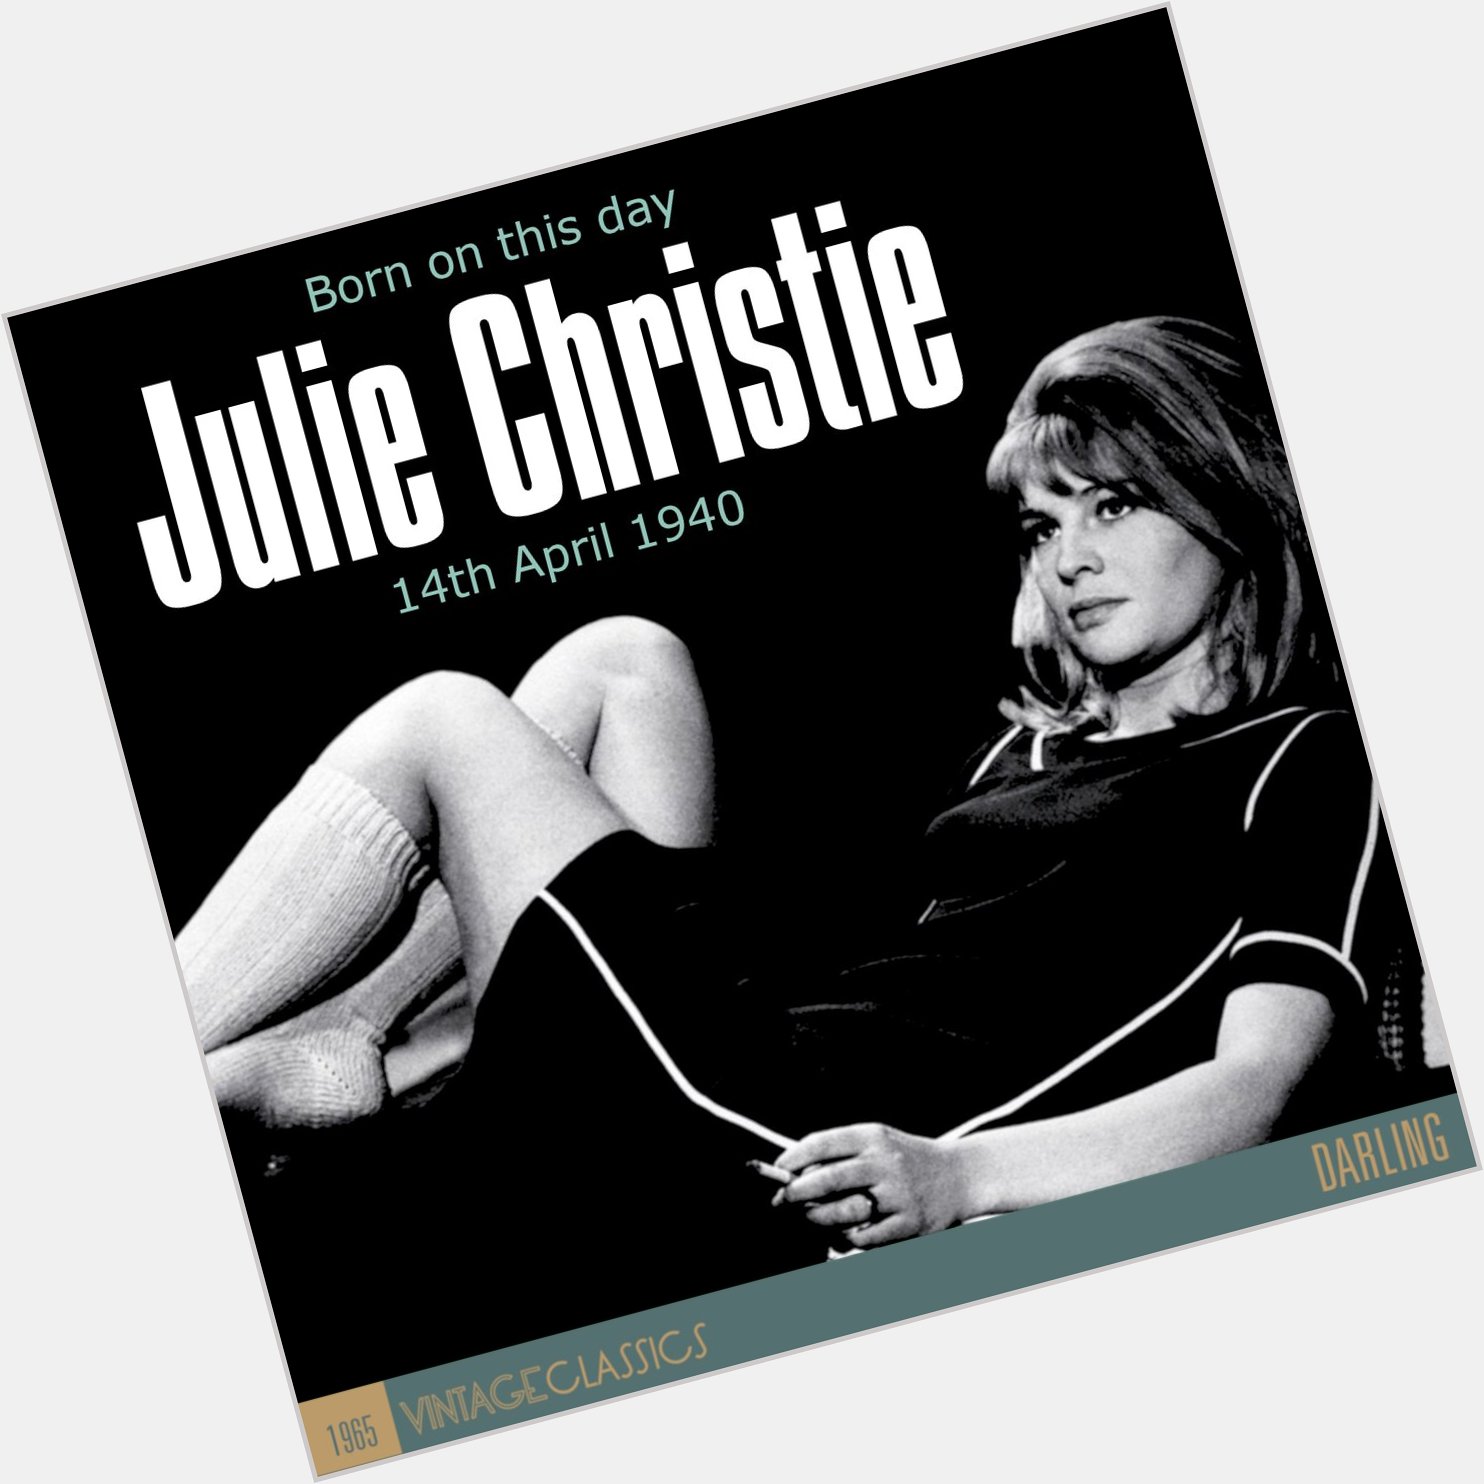 A very Happy 80th Birthday to the finest icon of the Swinging Sixties, Julie Christie. A true Darling! 